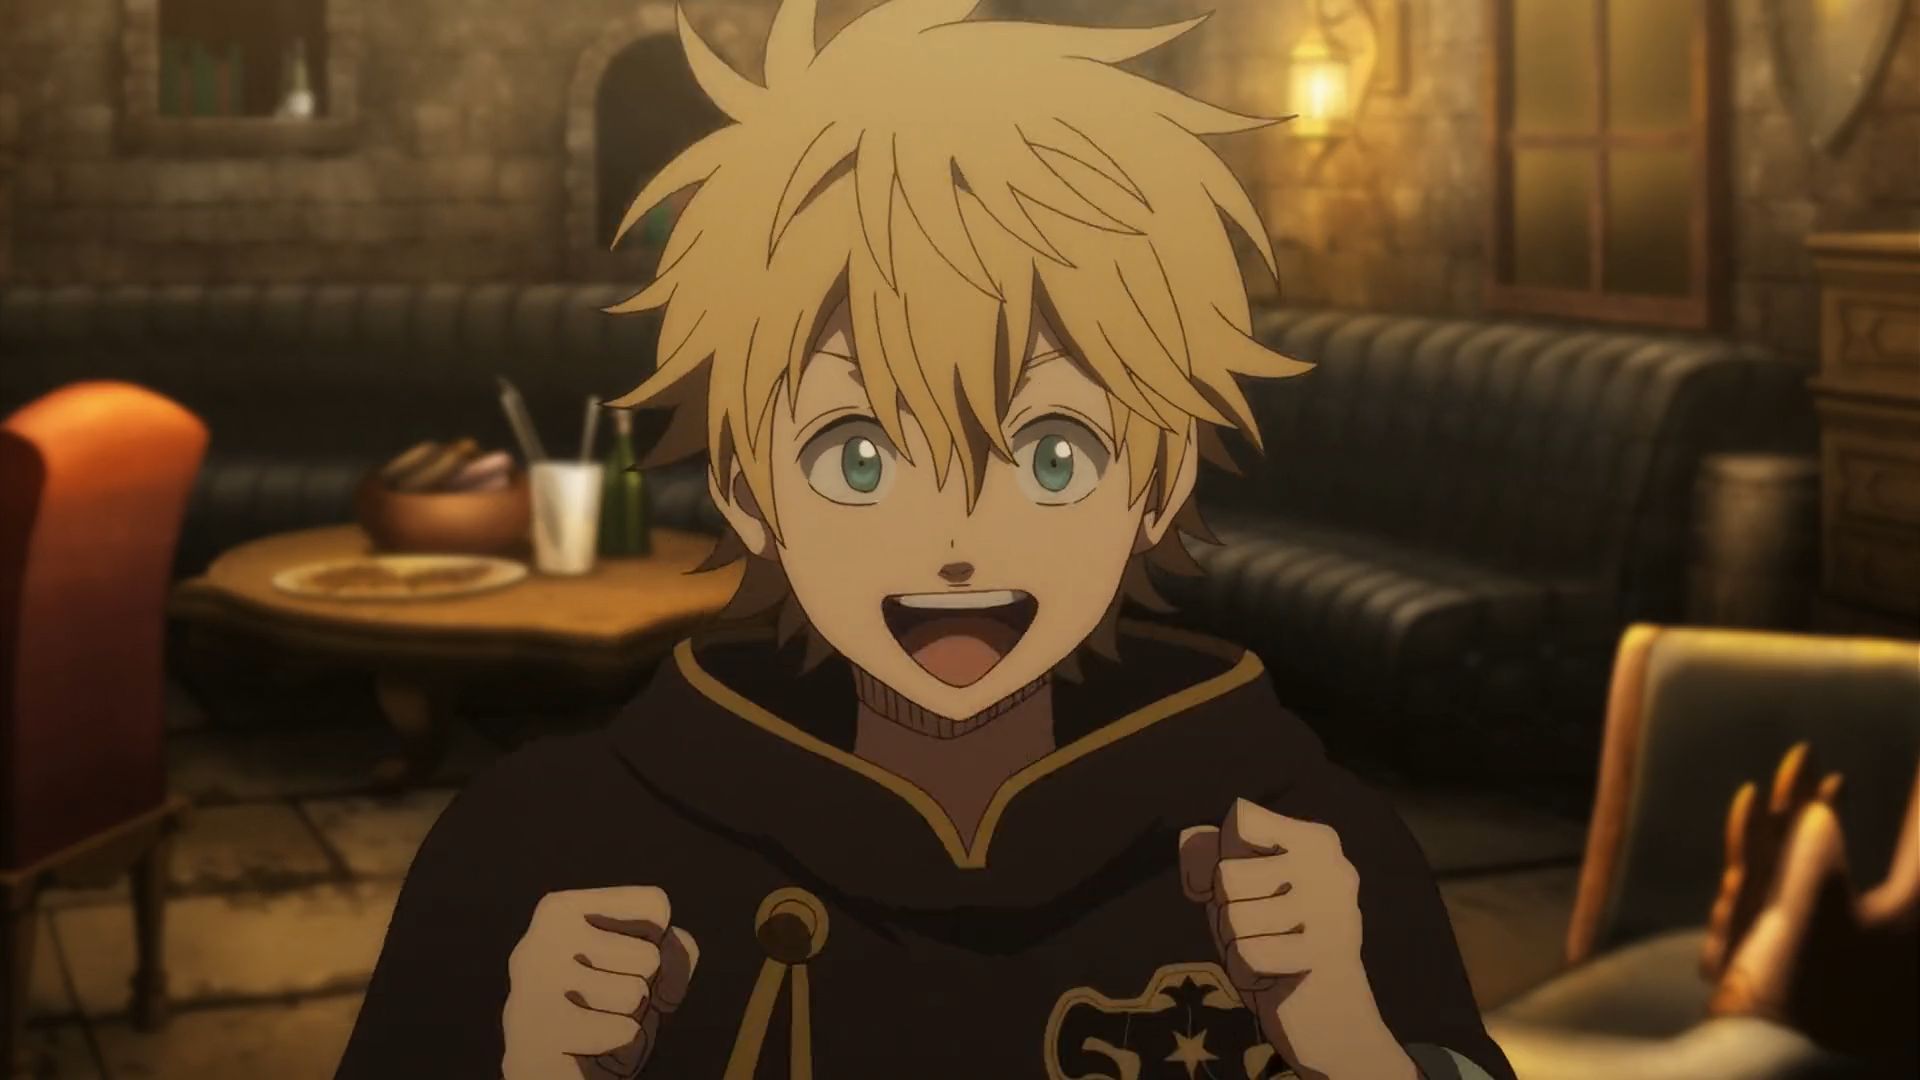 Luck Voltia from Black Clover is one of the cute anime boys.